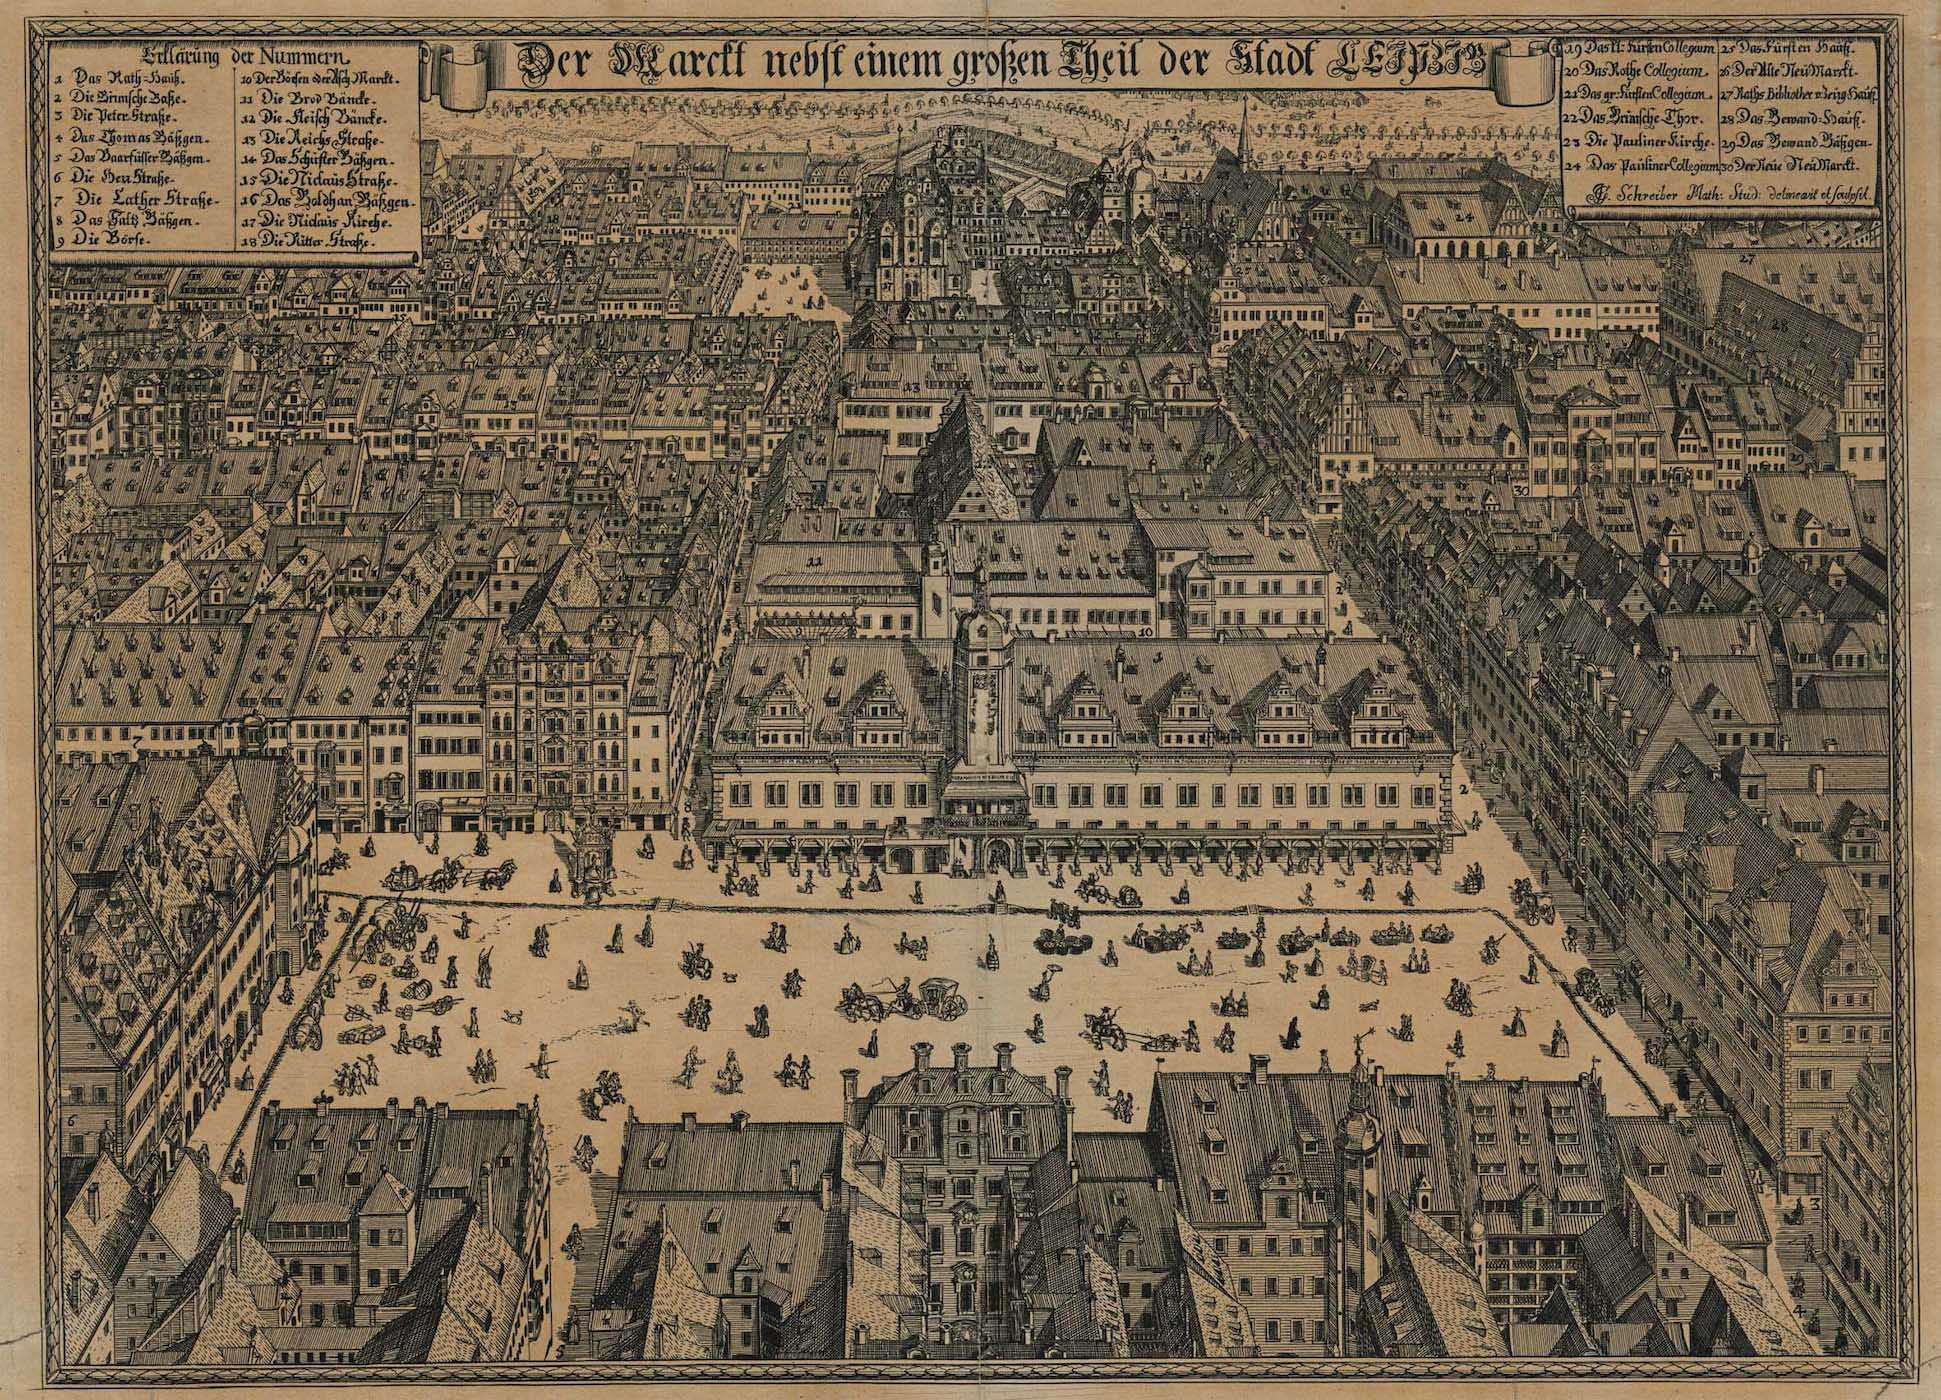 View of the city of Leipzig centered on the main square and the Altes Rathaus (Old Town Hall) from 1712.